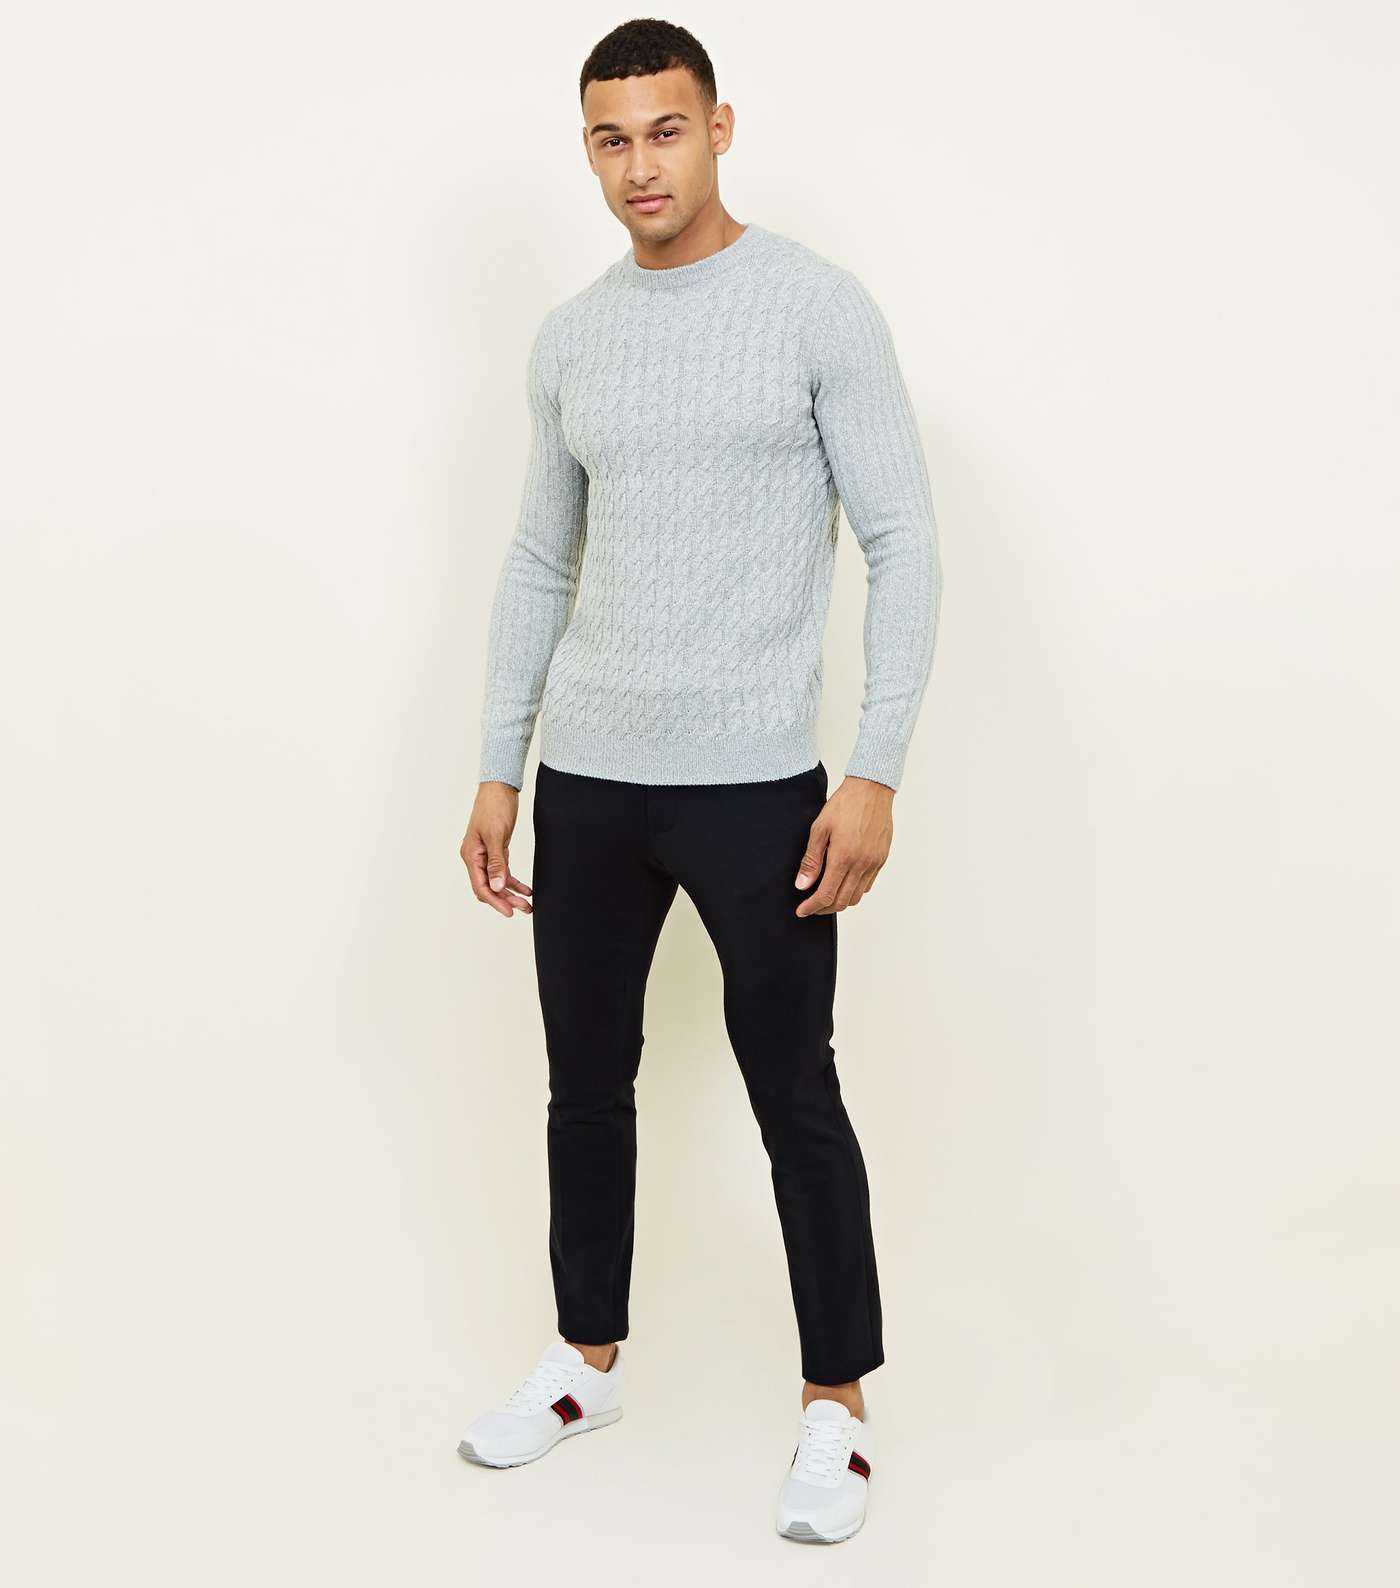 Grey Cable Knit Long Sleeve Jumper Image 2